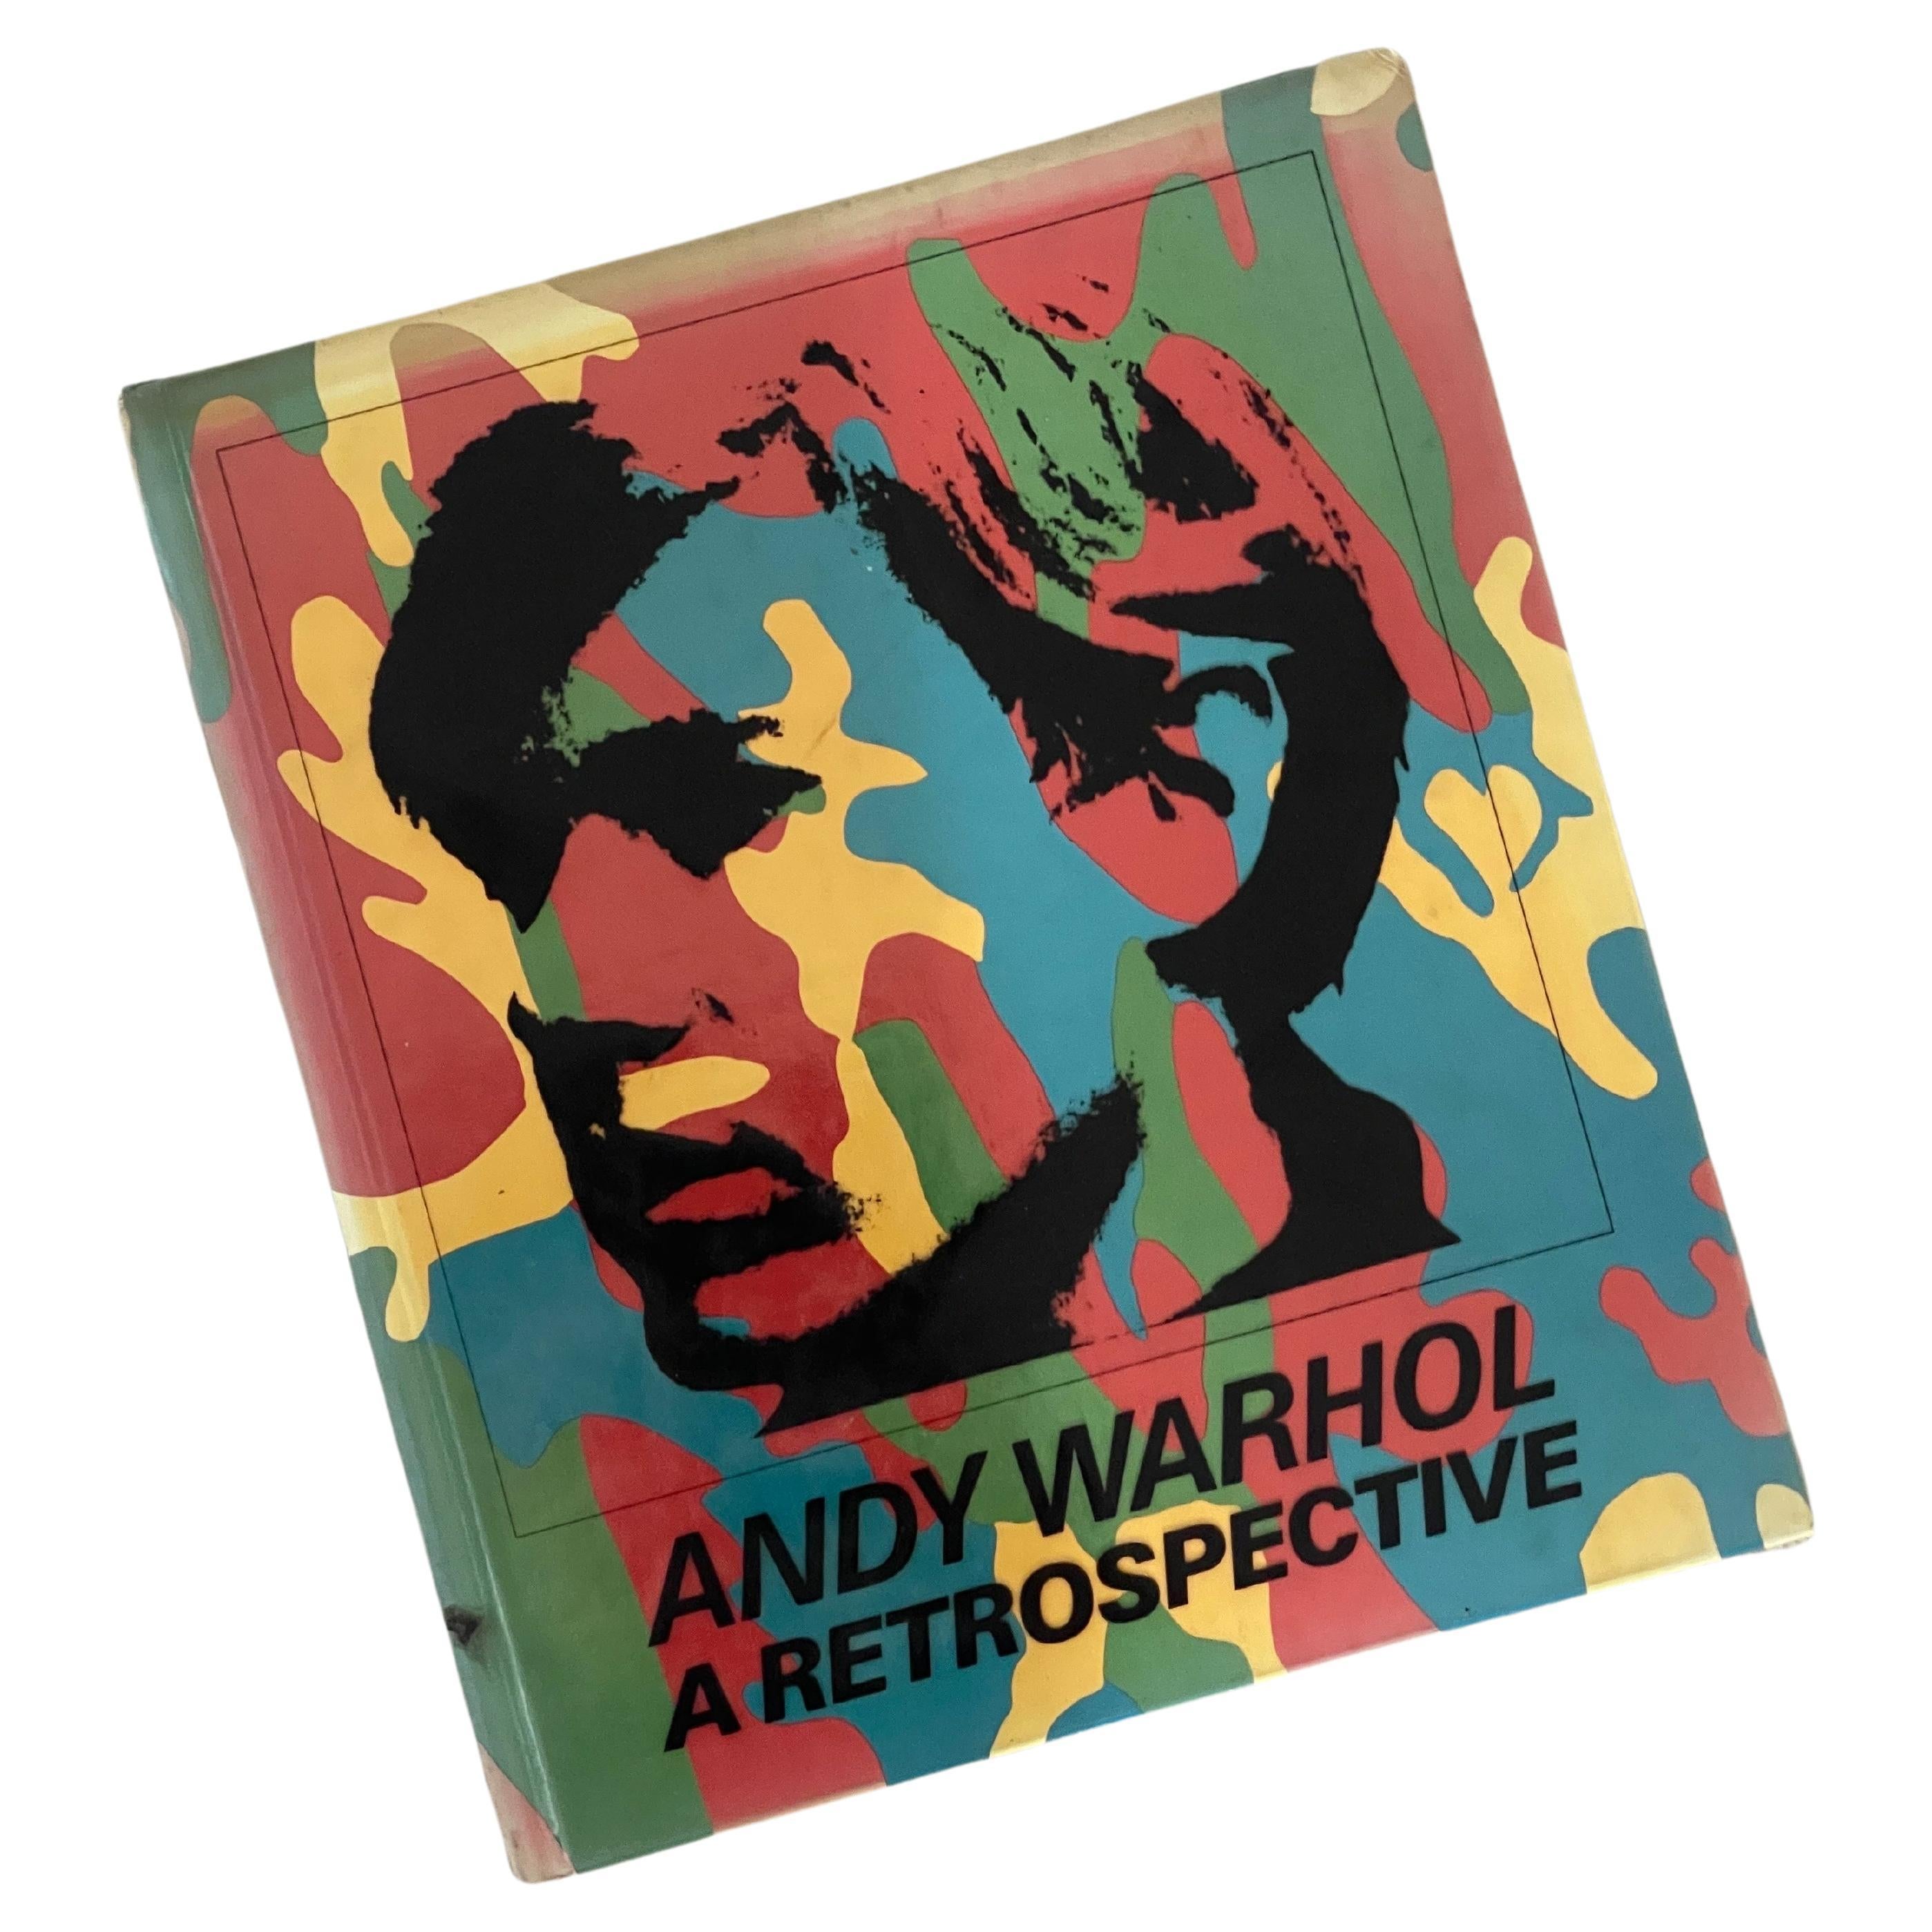 "Andy Warhol A Retrospective" Art Book MOMA First Edition 1989